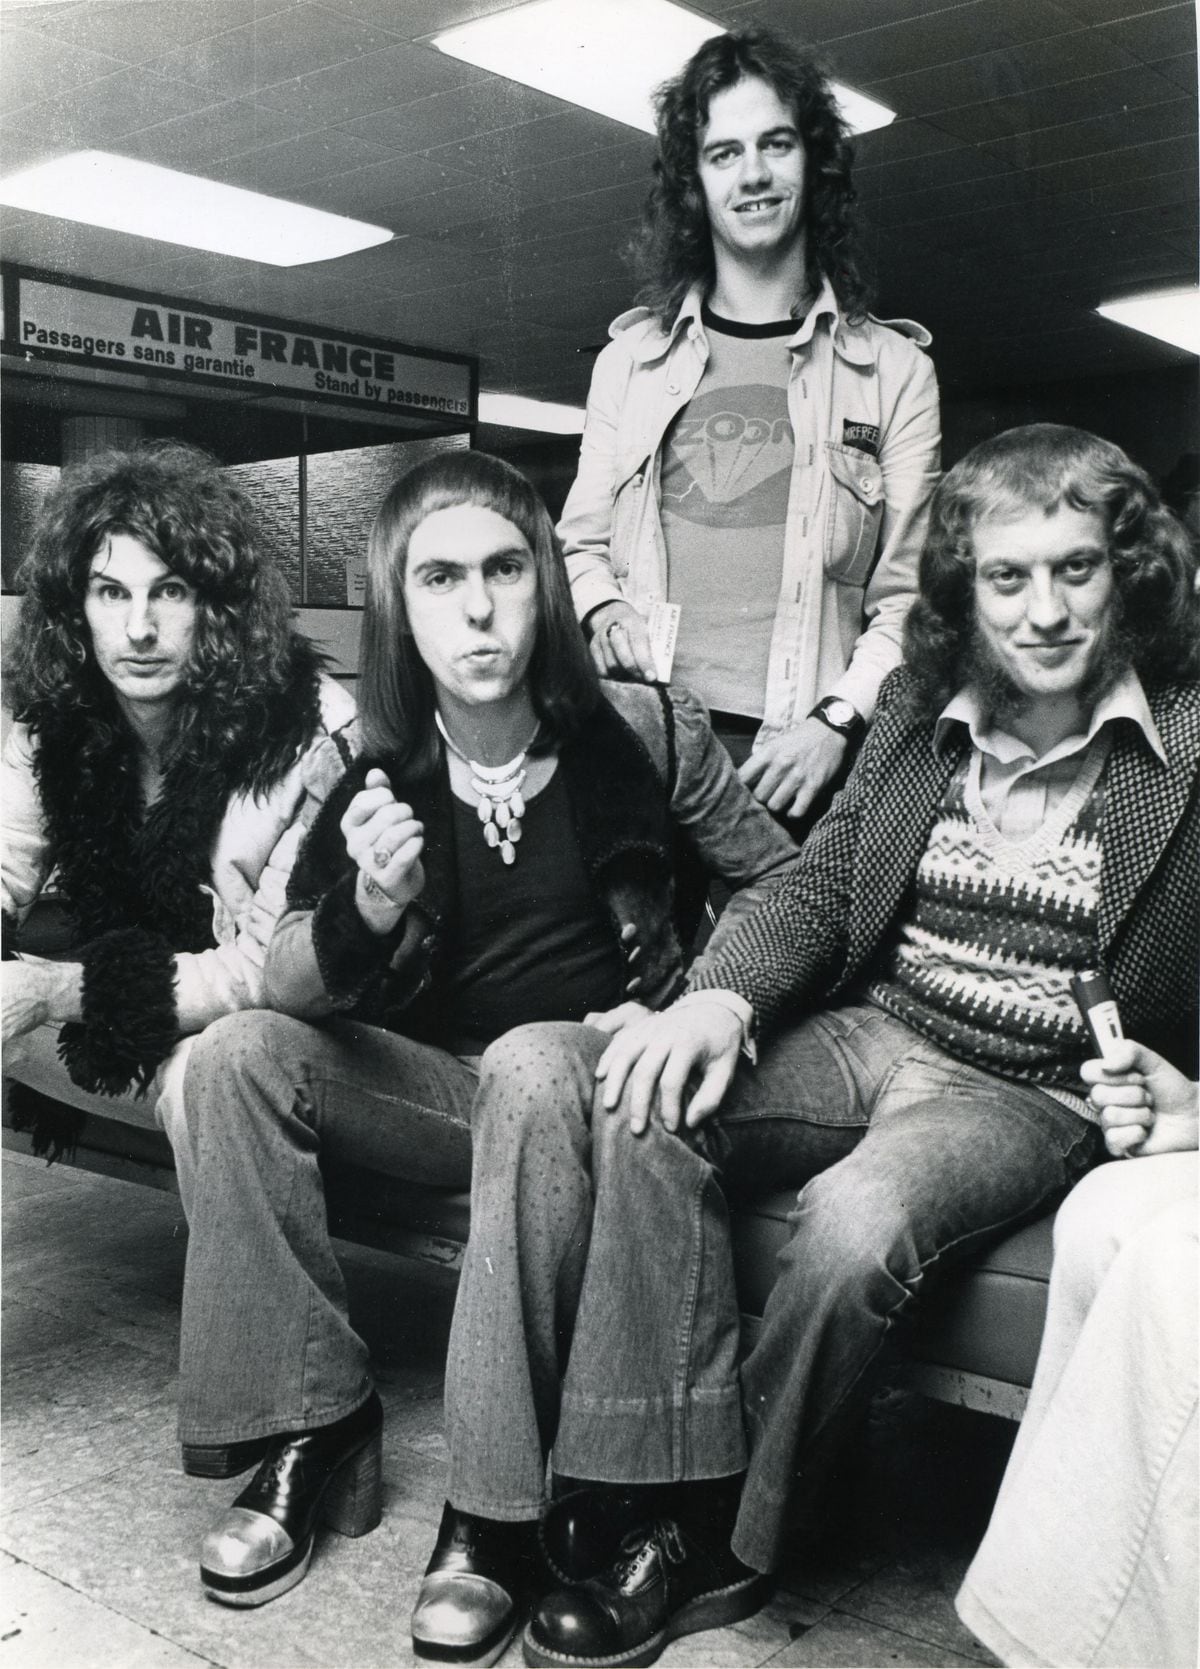 Slade at Heathrow airport in 1972